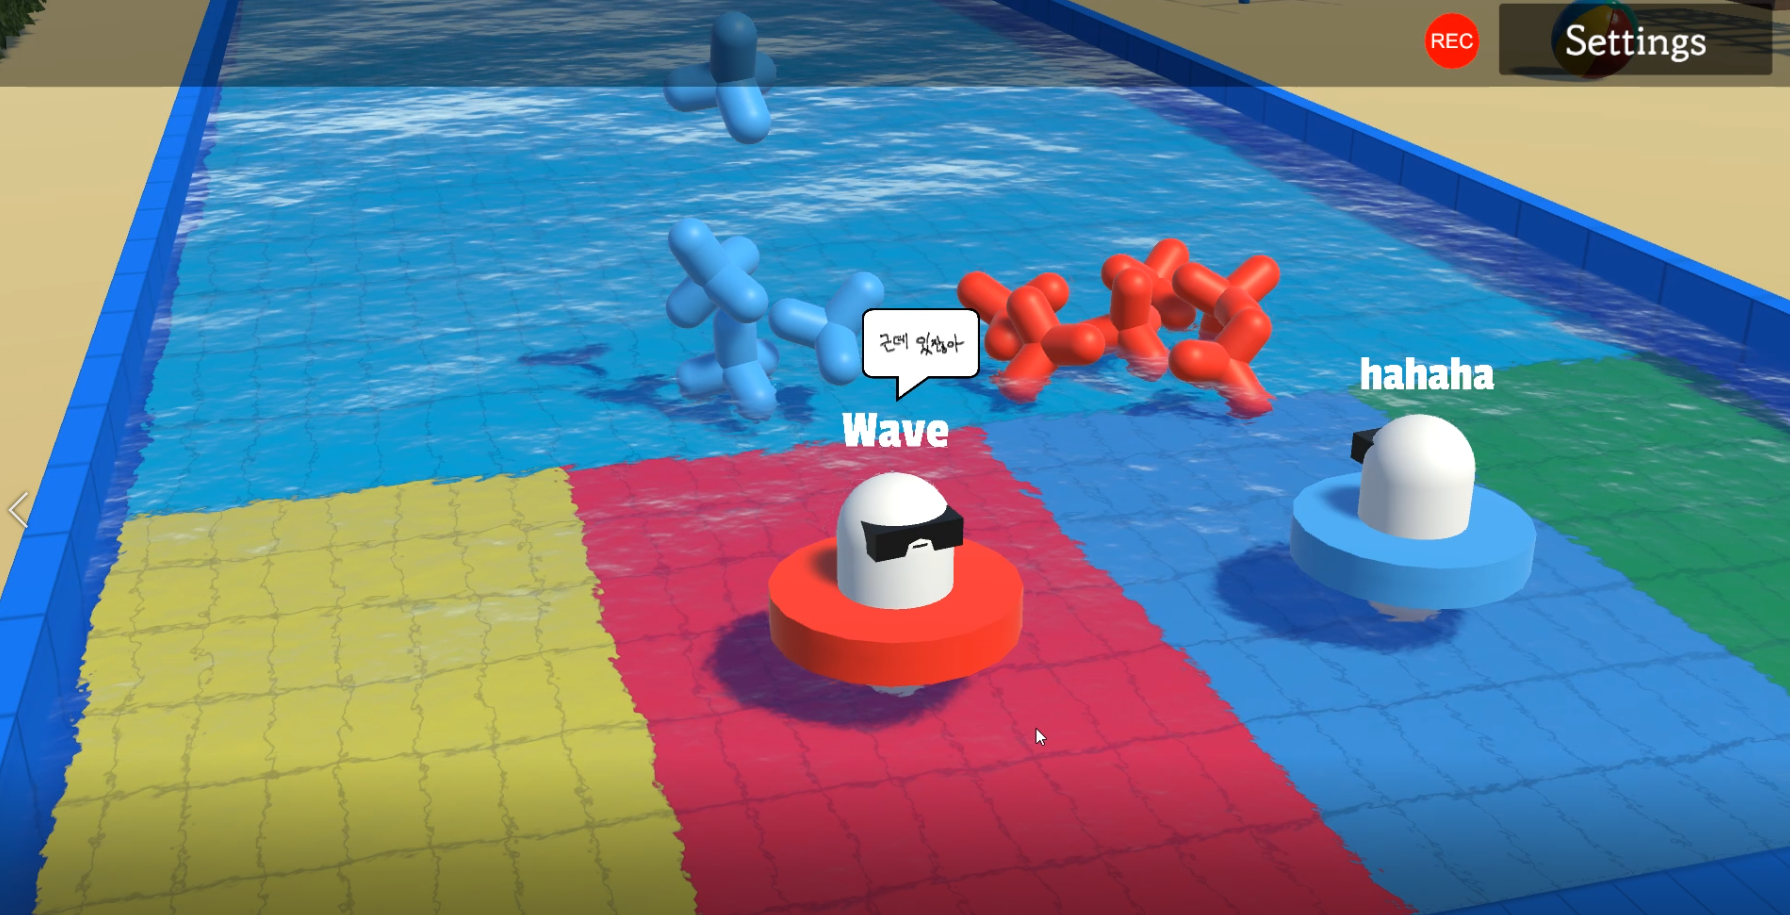 “Anyway,”: Two-player Defense Game via Voice Conversation